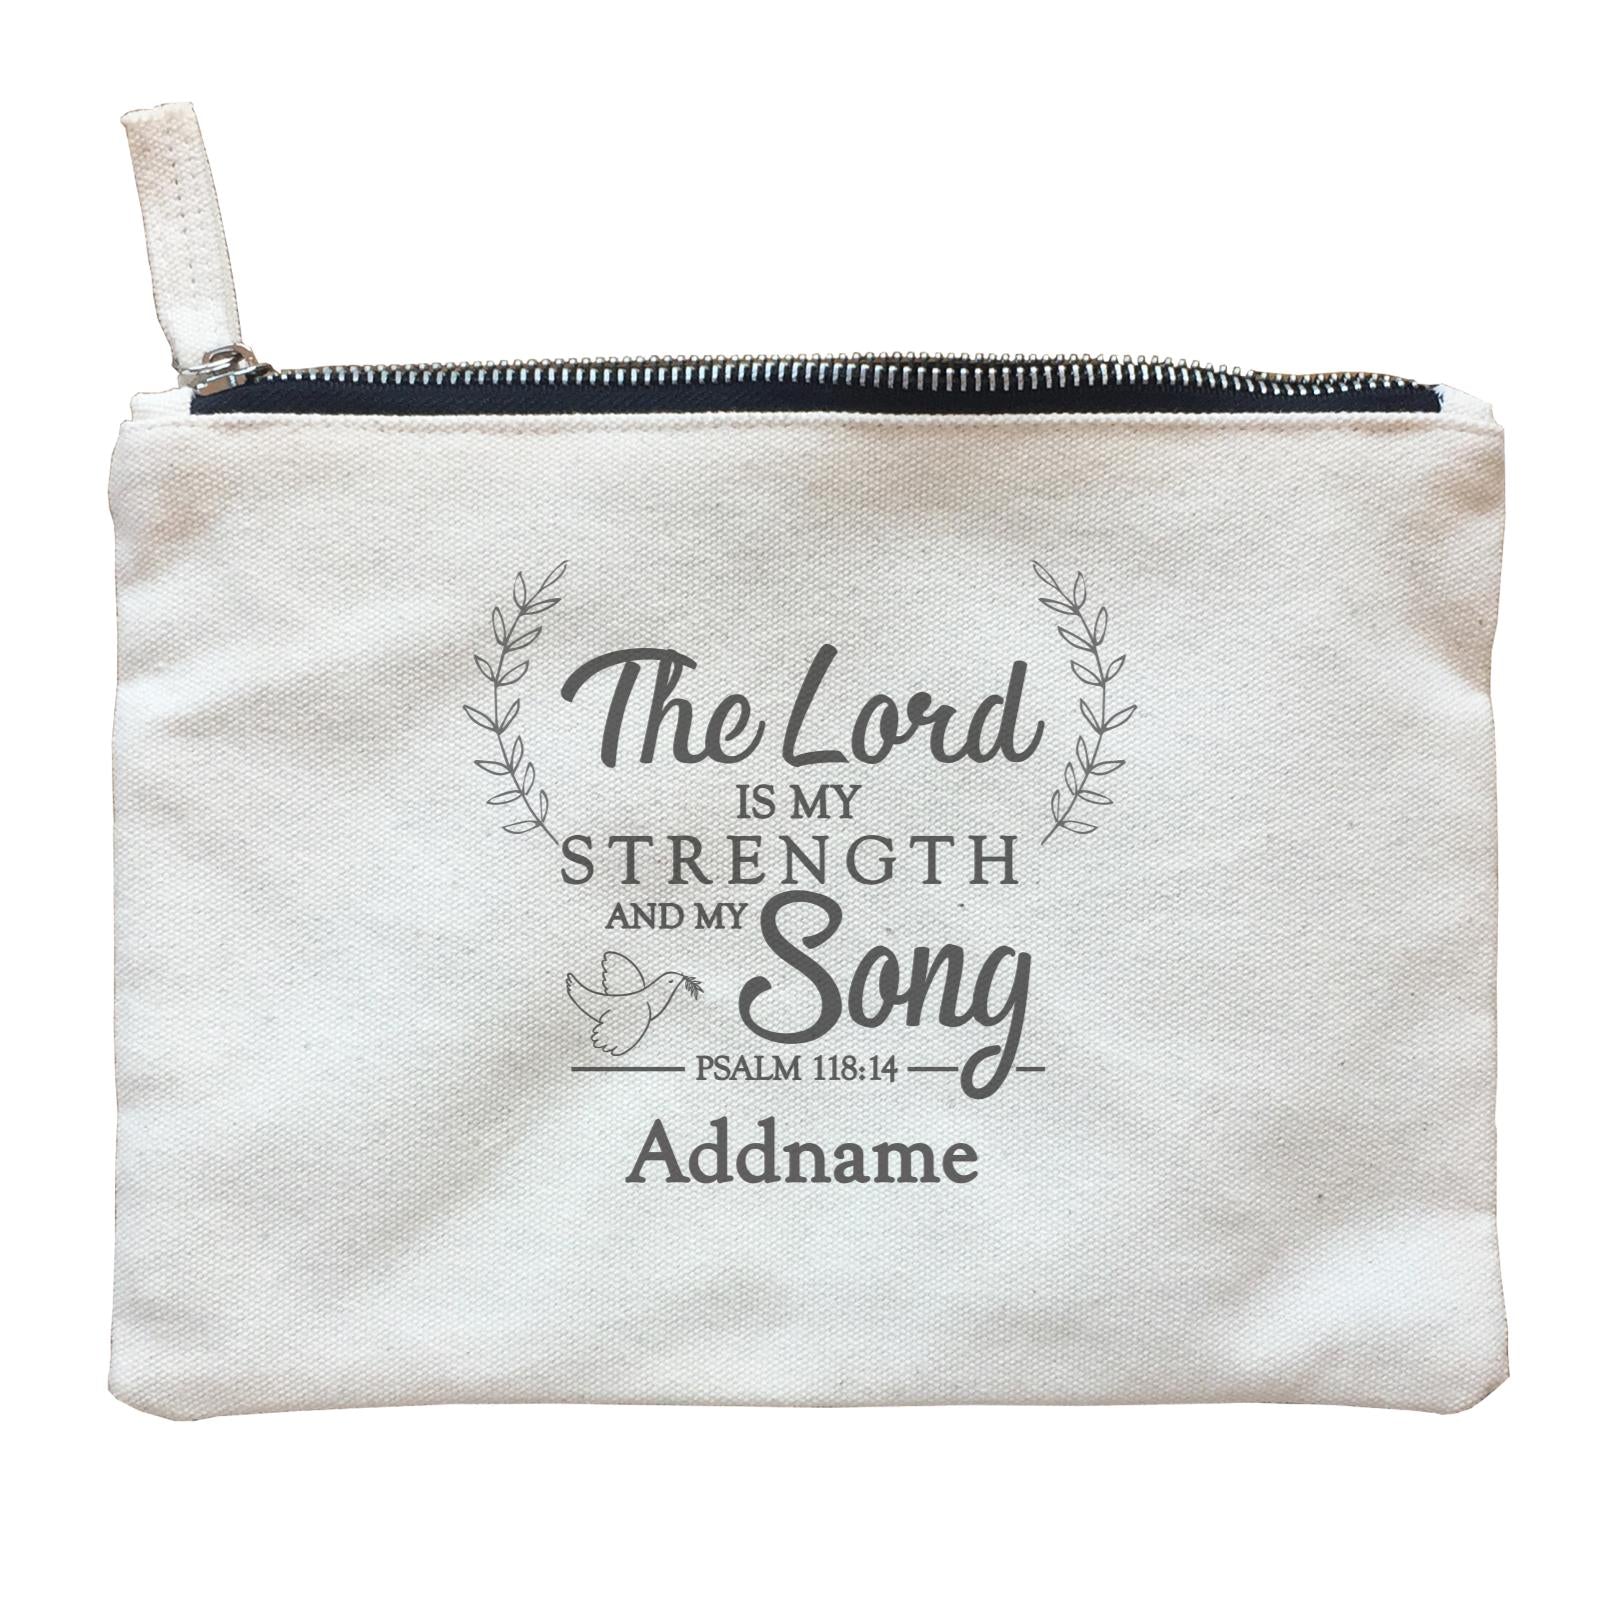 Christian Series The Lord Is My Strength Song Psalm 118.14 Addname Zipper Pouch